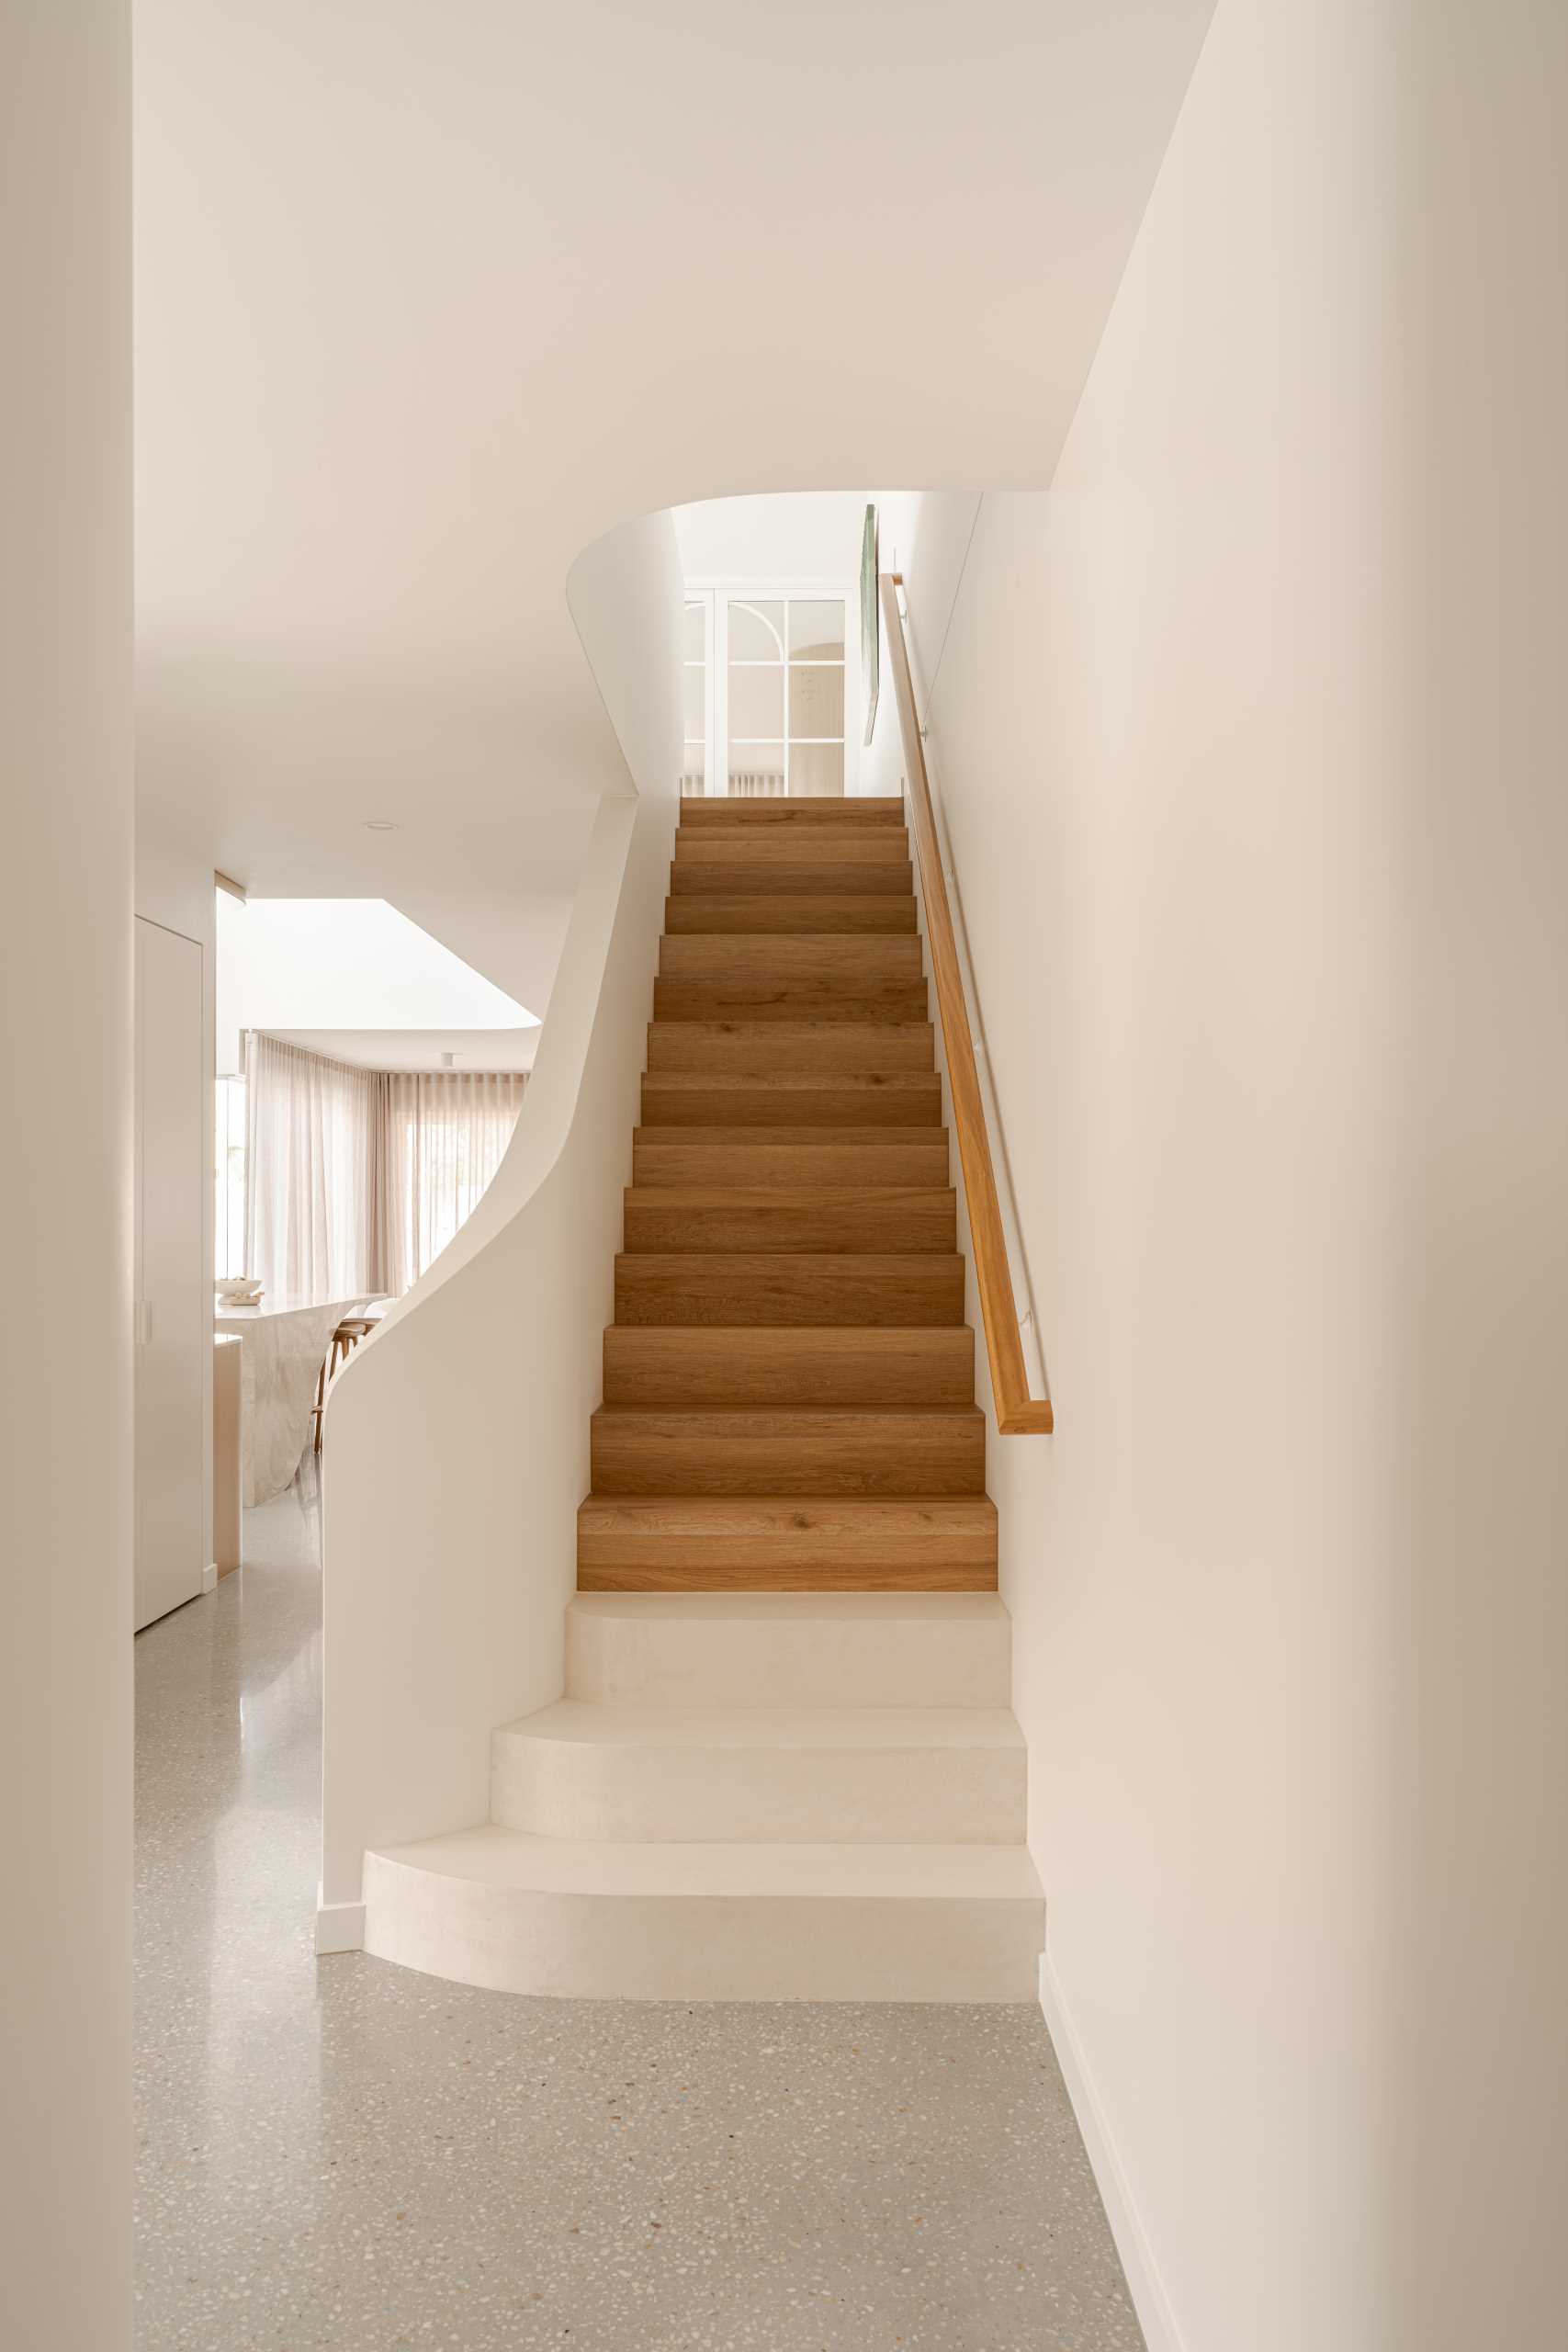 Wood stairs lead to the upper floor of this contemporary ،me with a neutral color palette.